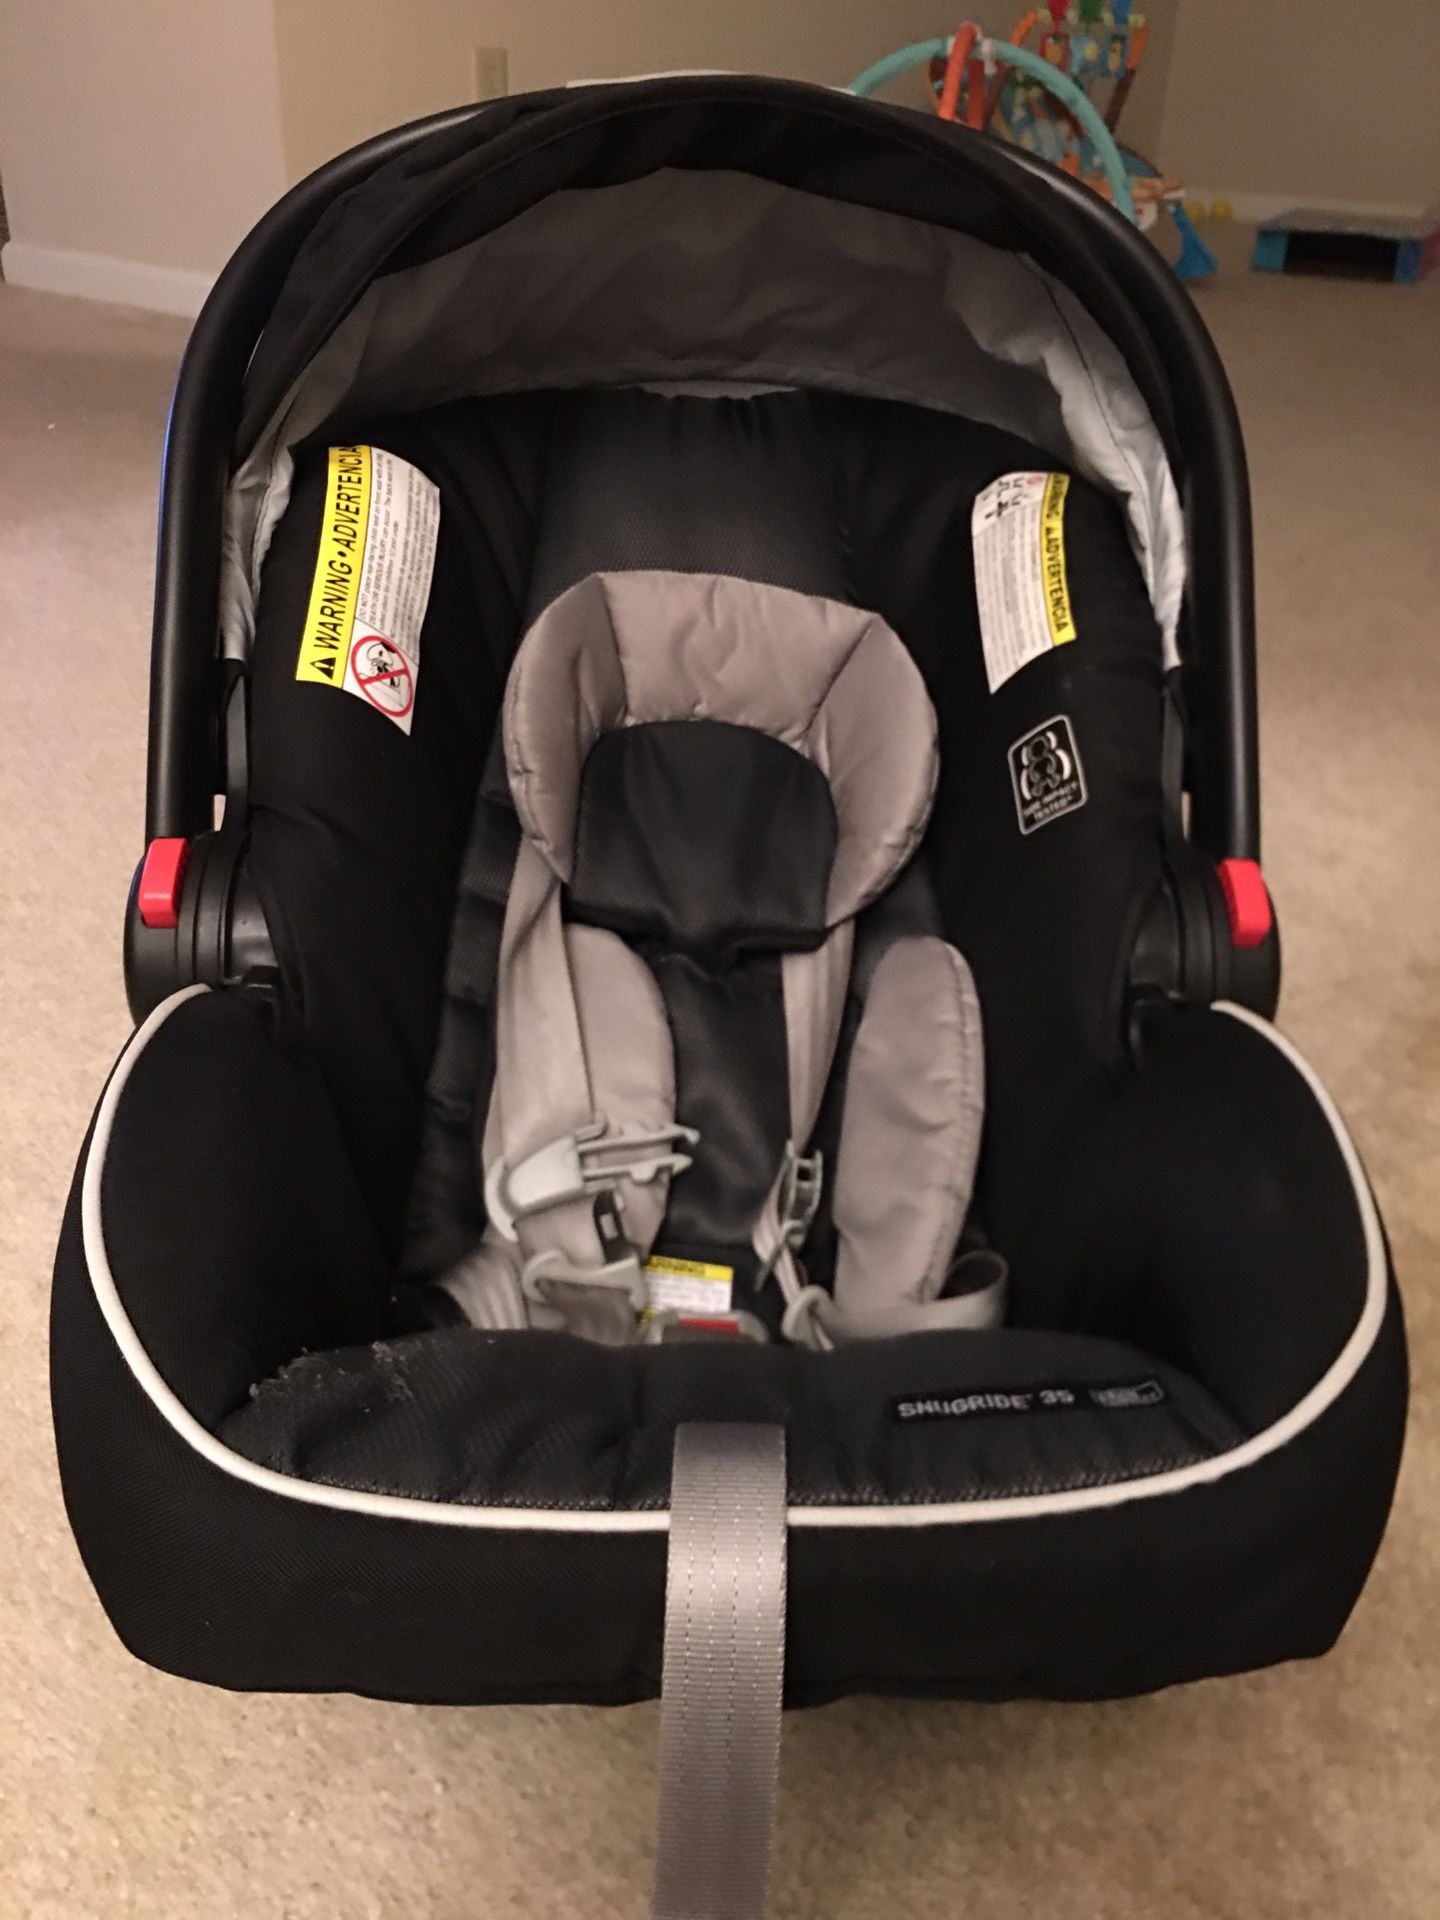 Graco infant click connect car seat(10 months old) with base and free new never used head supporter